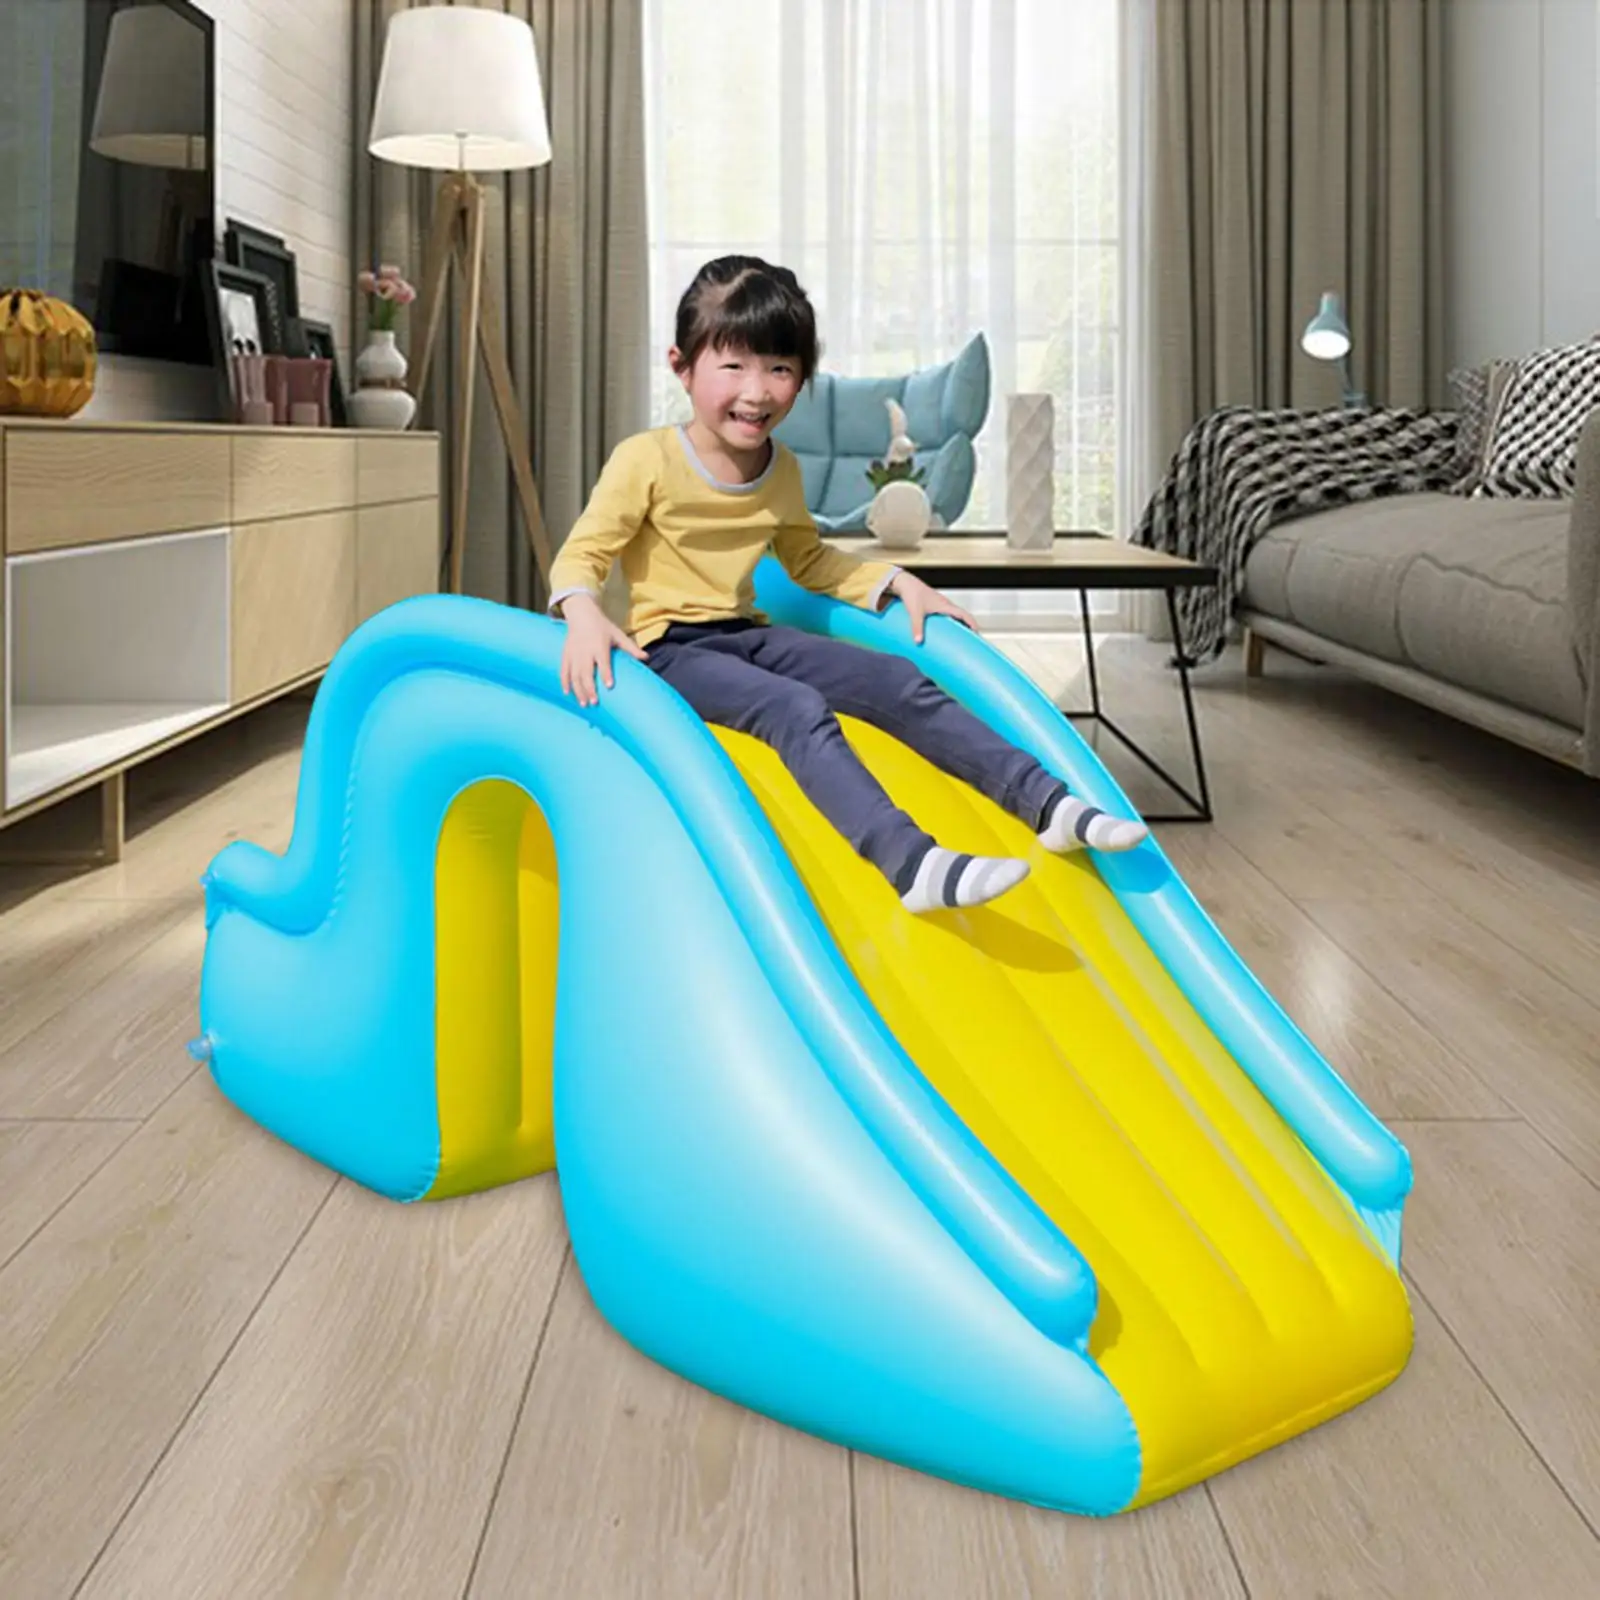 Inflatable Pool Slide Strong Climber Playset Easy Assembly Kids Slide for Paddling Pool Outdoor Garden above Ground Pool Yard